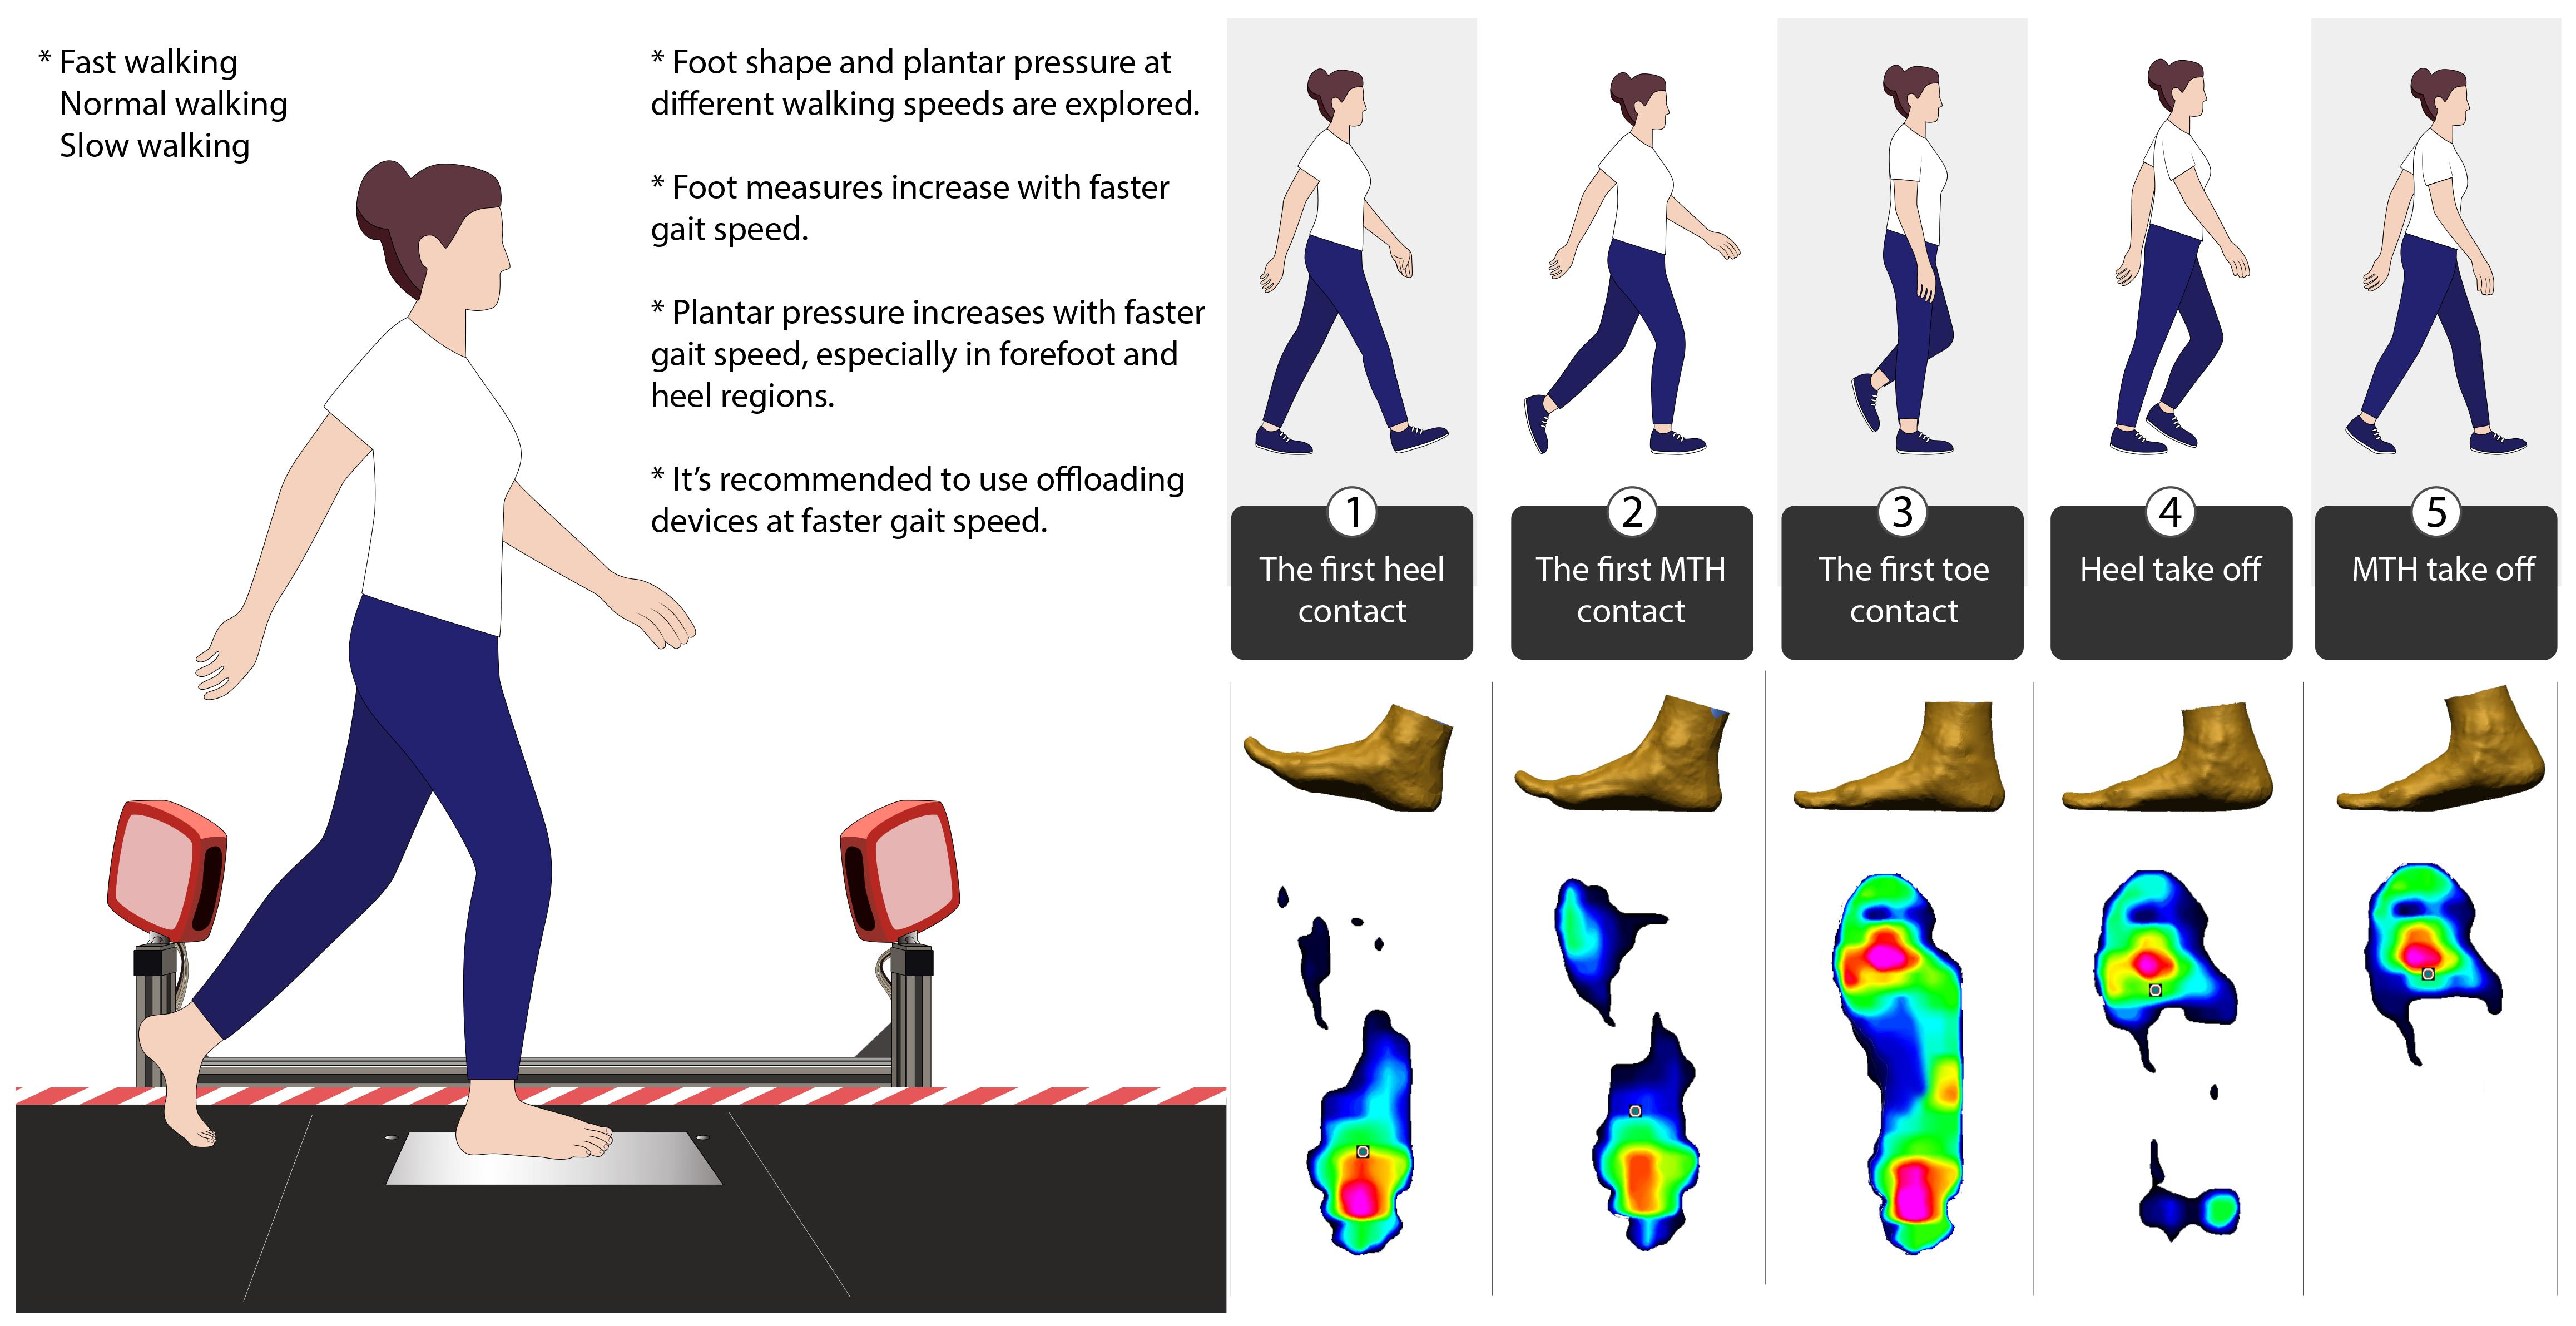 The efficacy of removable devices to offload and heal neuropathic plantar  forefoot ulcers in people with diabetes: a single‐blinded multicentre  randomised controlled trial - Bus - 2018 - International Wound Journal -  Wiley Online Library